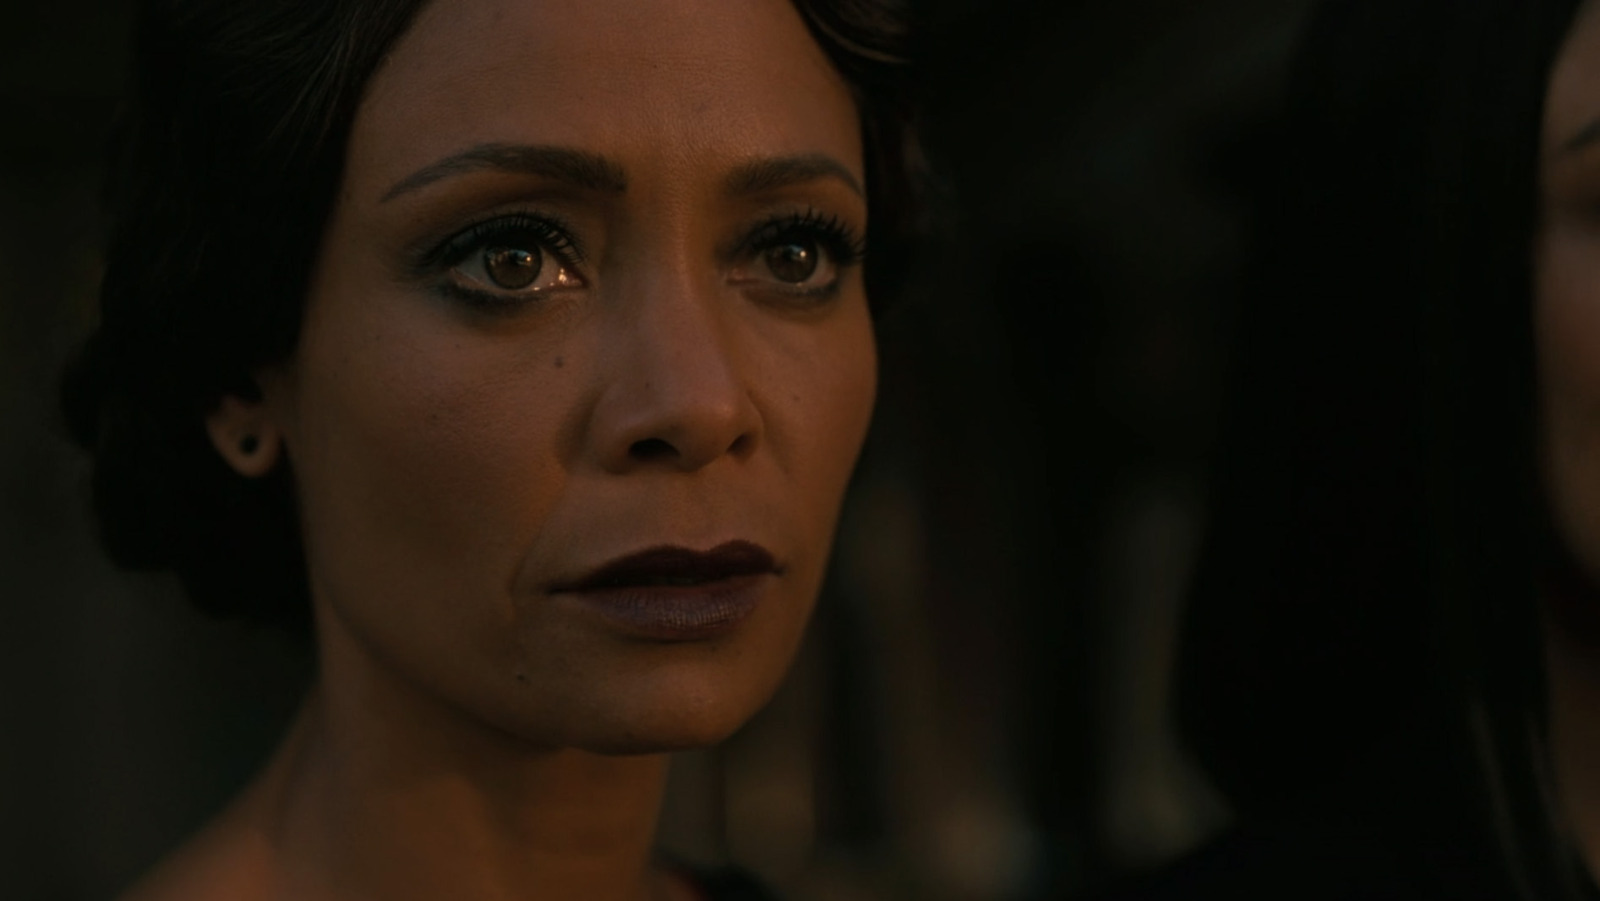 #In Westworld Season 4, Episode 4, ‘Generation Loss’ Gains New Meaning